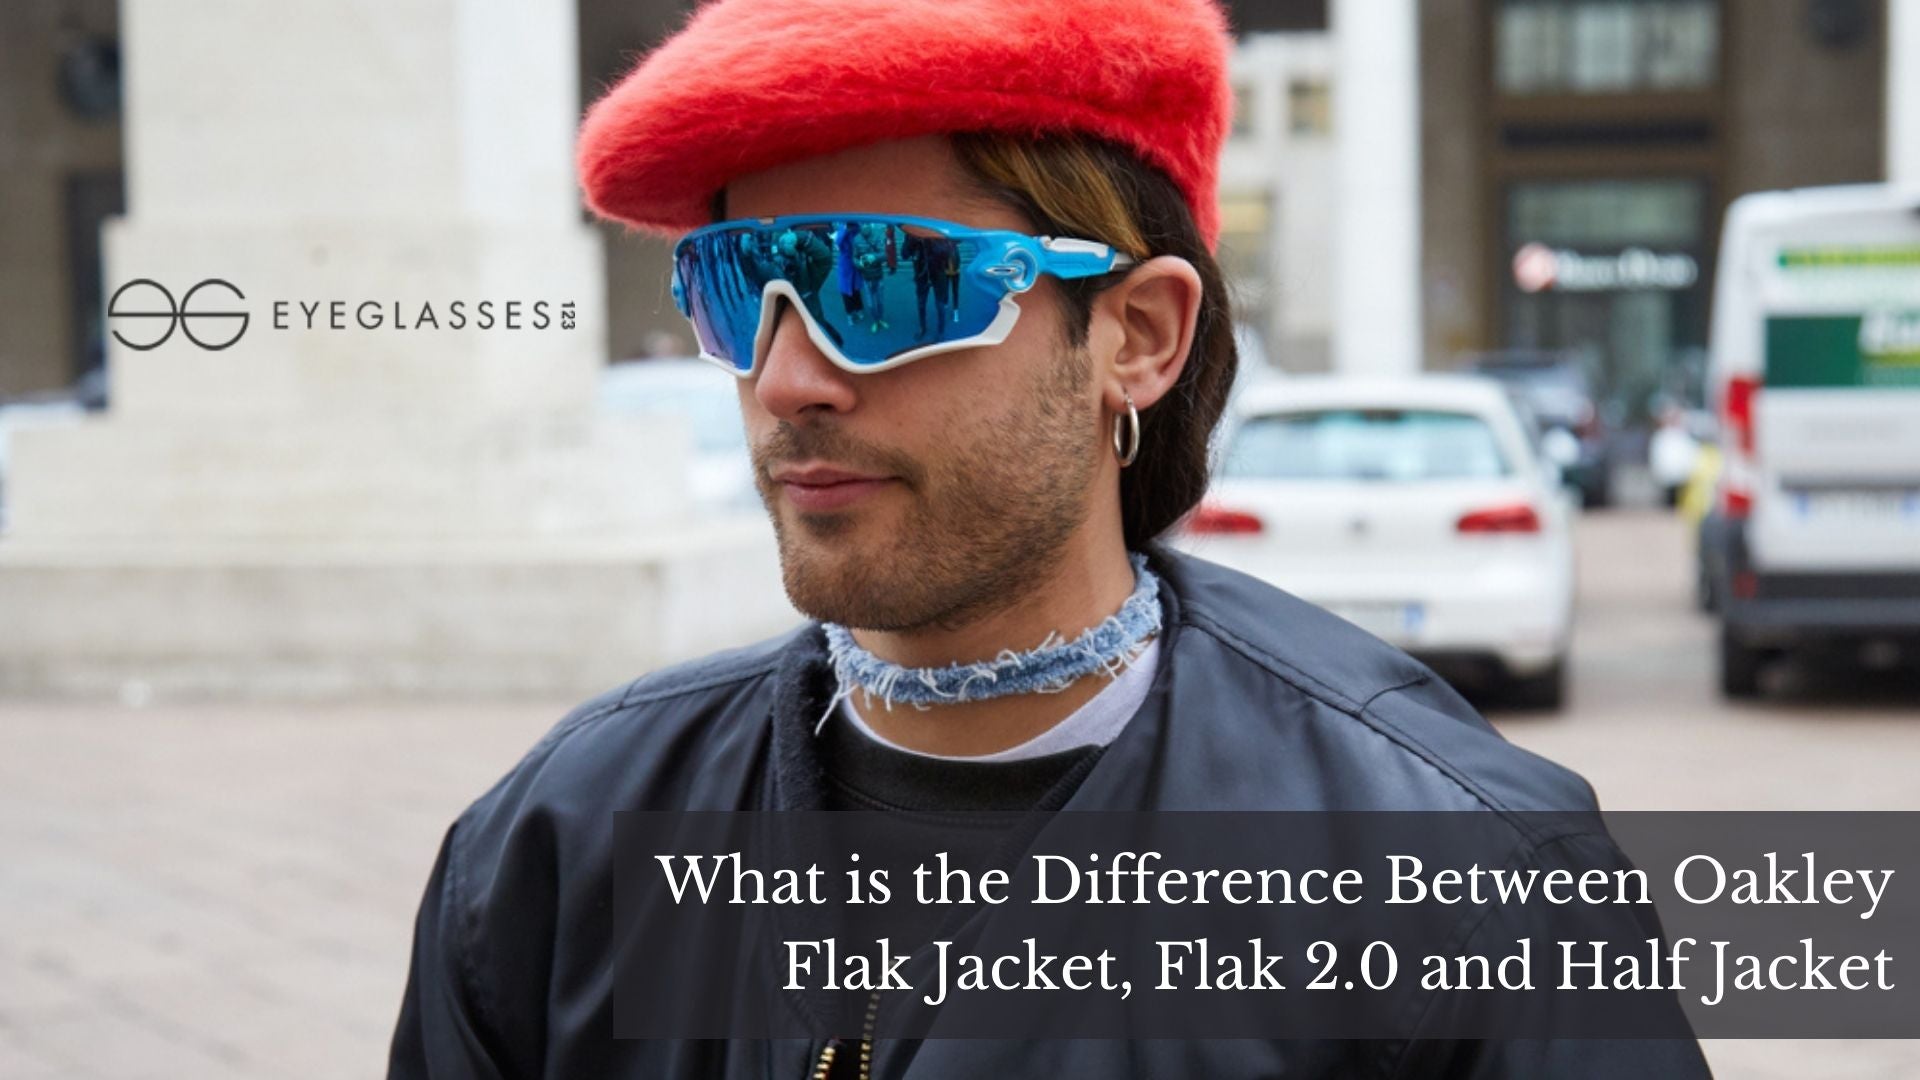 What is the Difference Between Oakley Flak Jacket, Flak 2.0 and Half Jacket